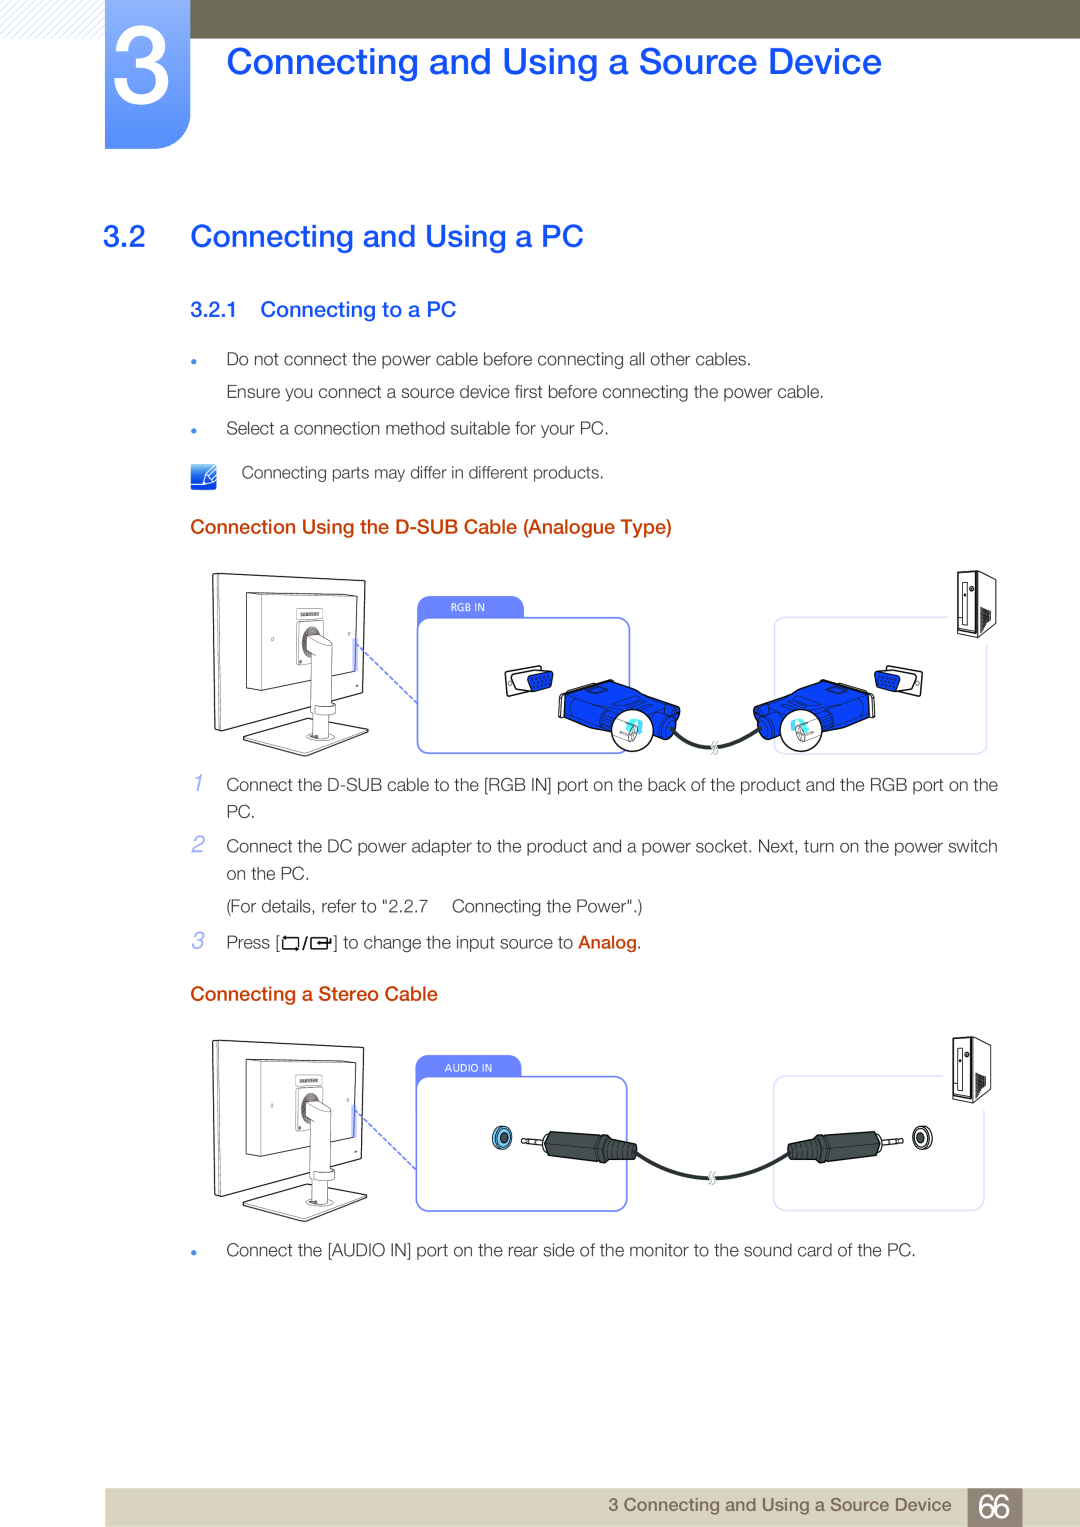 Samsung NC241, NC190-T, NC191 Connecting and Using a PC, Connecting to a PC, Connection Using the D-SUB Cable Analogue Type 